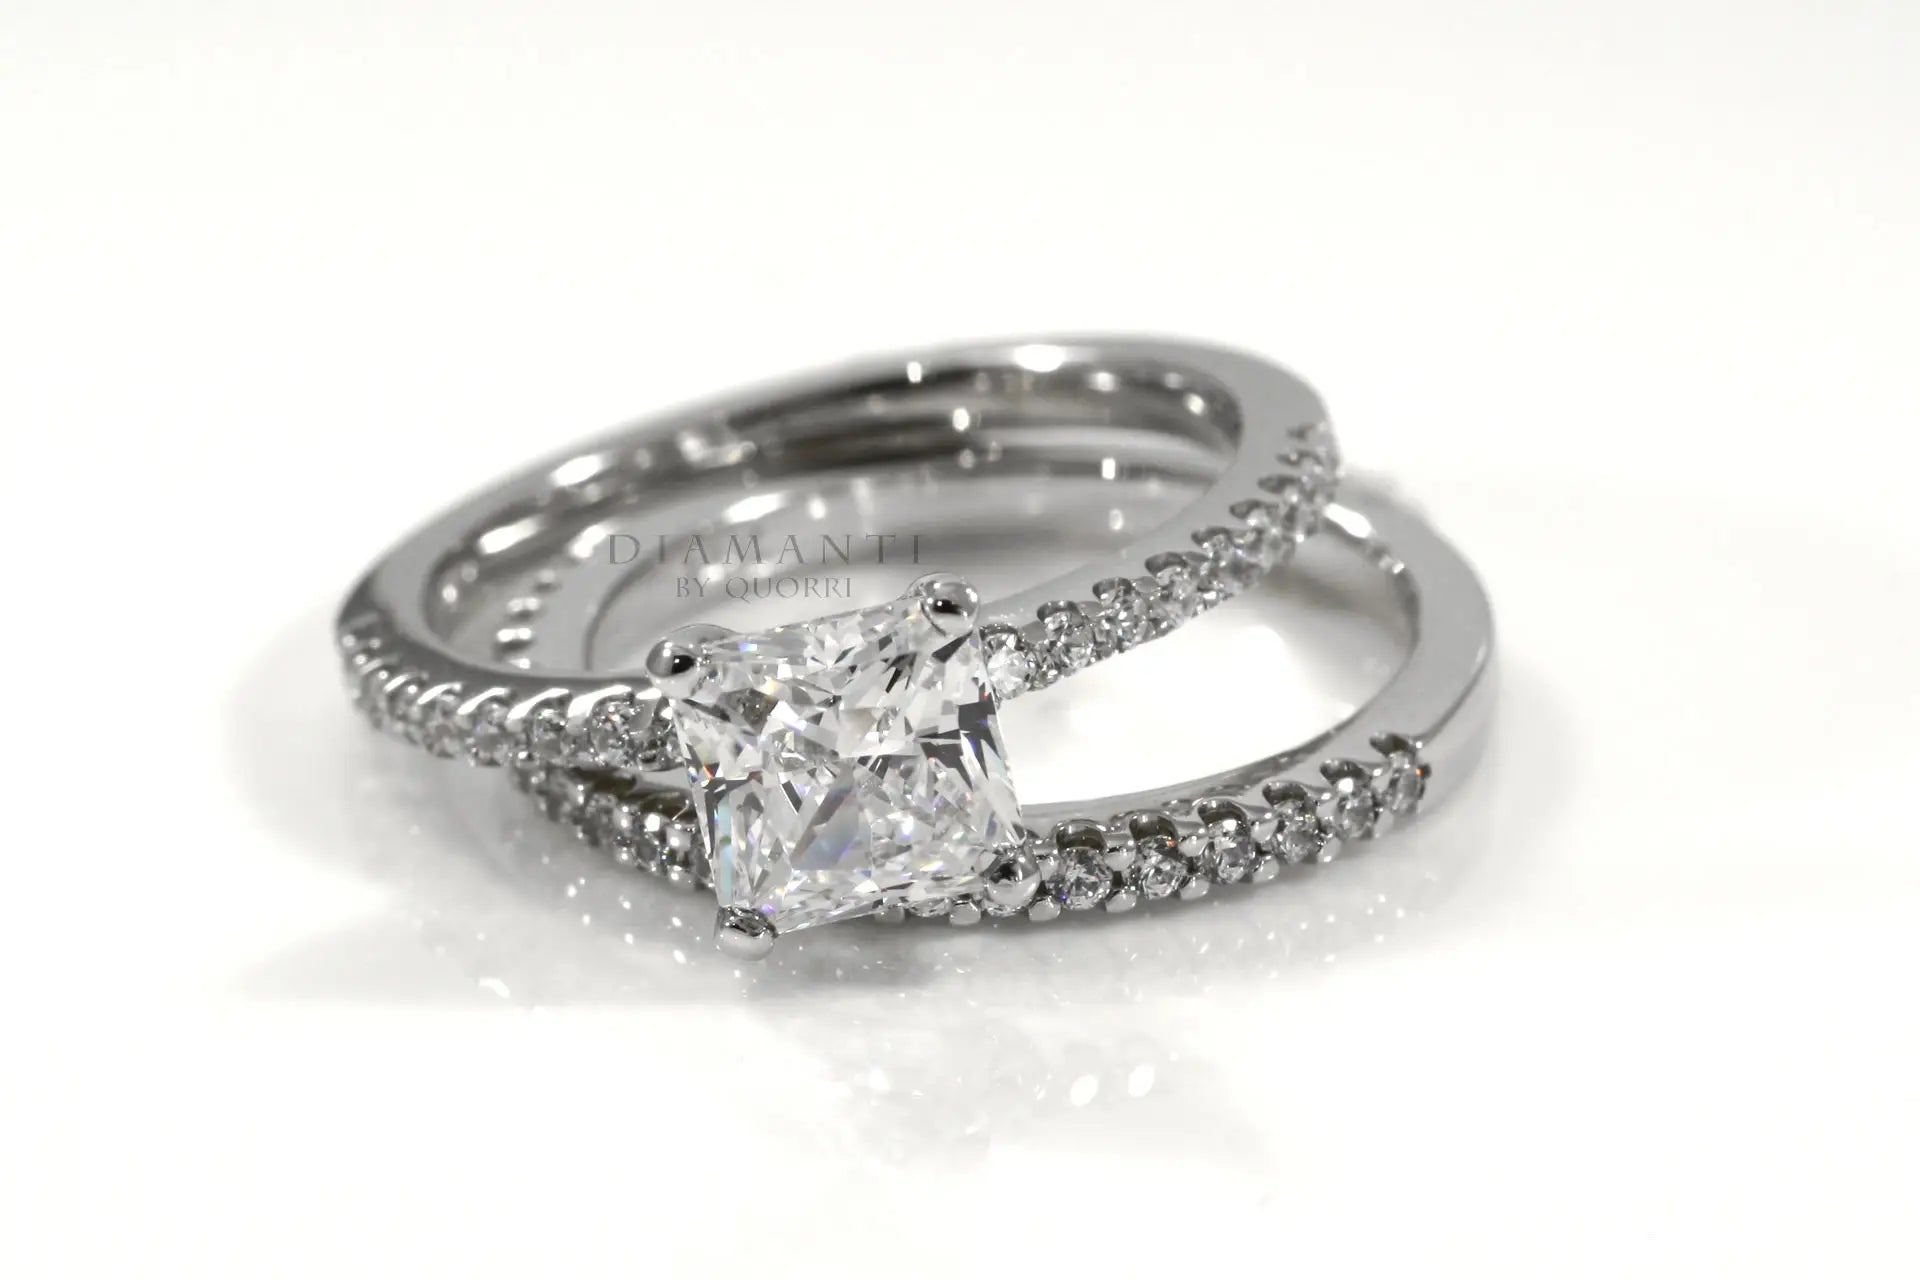 18k white gold accented affordable 2 carat princess lab diamond engagement ring and wedding band set Quorri